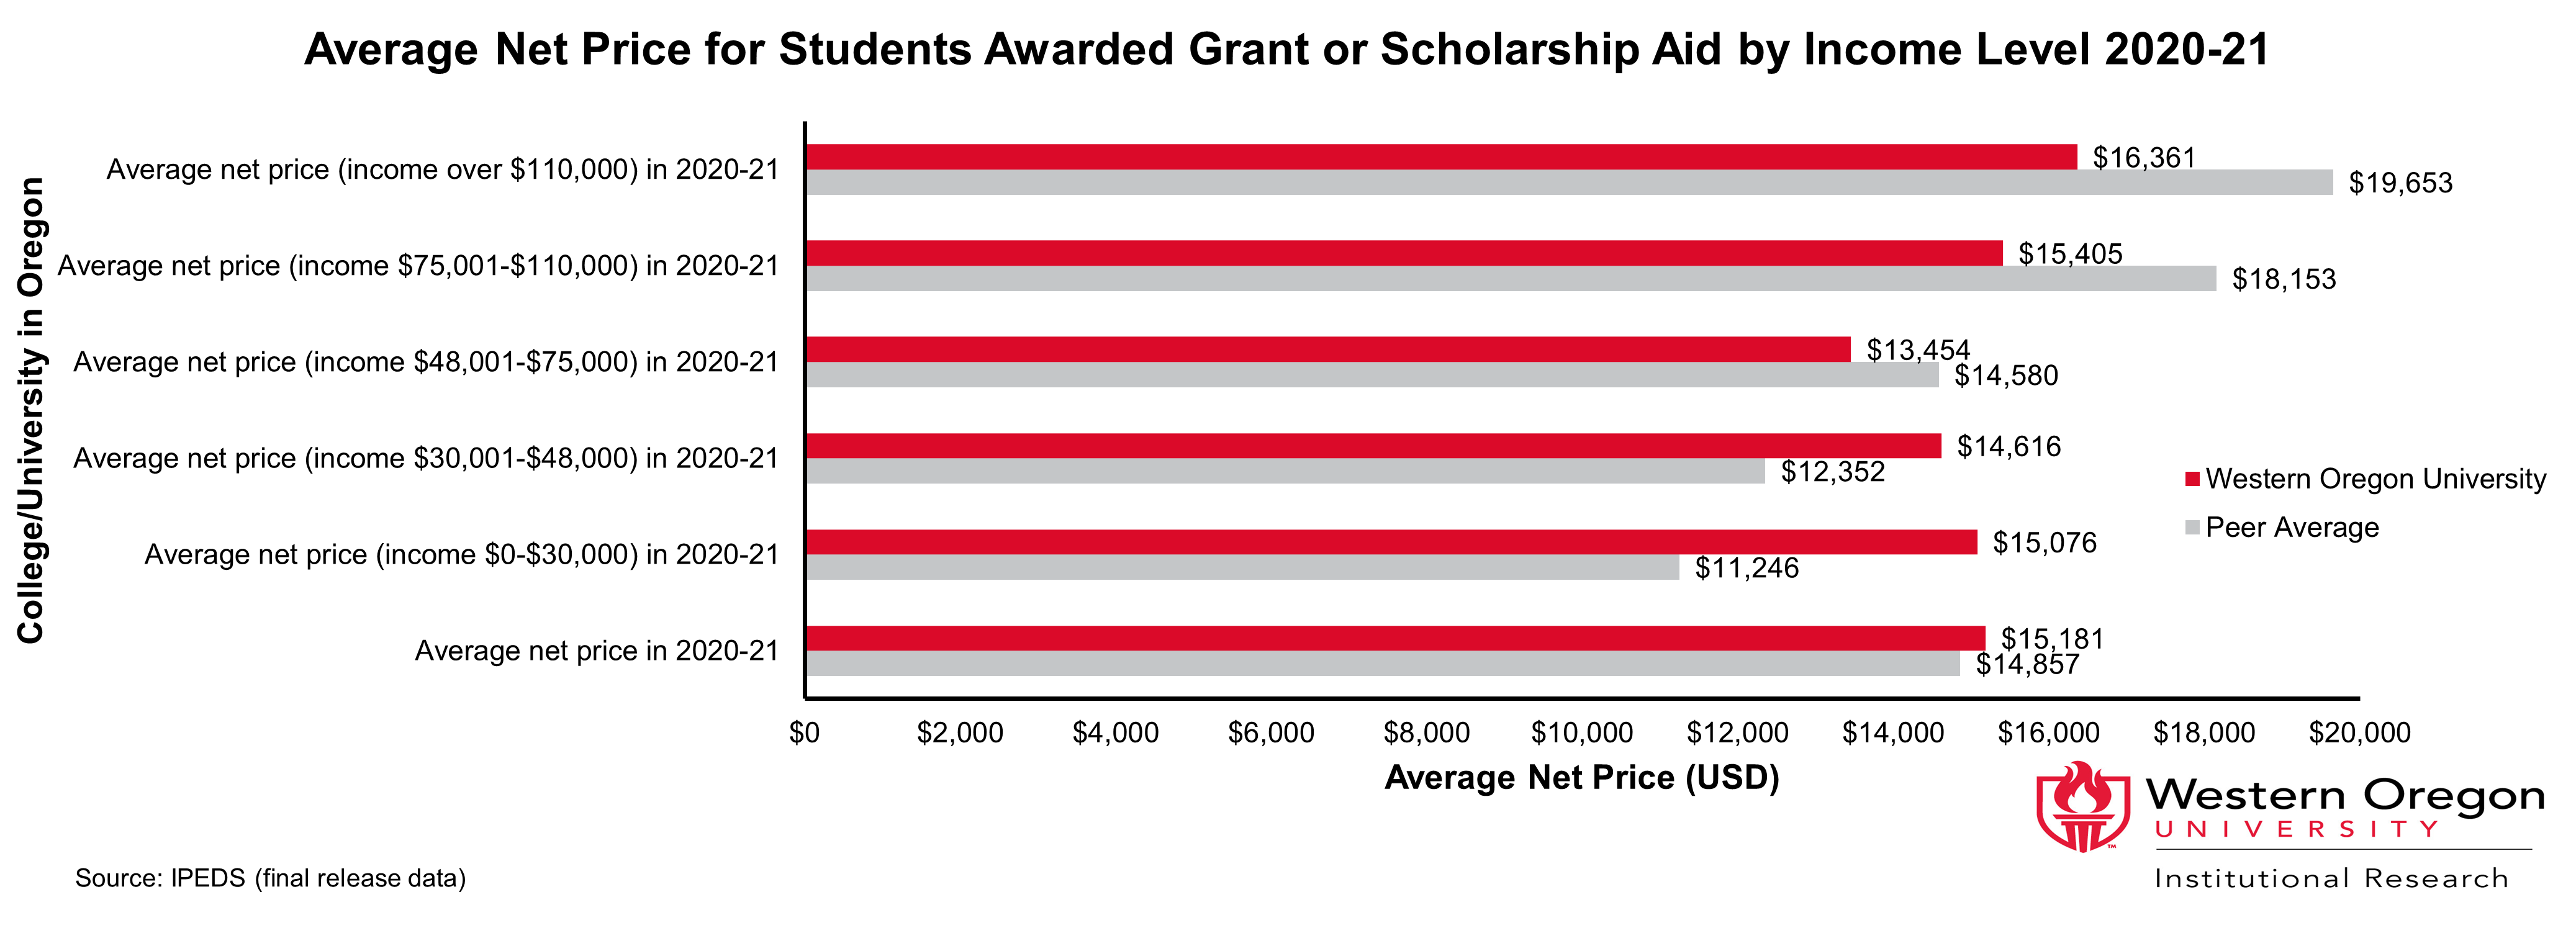 Bar graph of average net price for students awarded grant or scholarship aid by income level at WOU and peer institutions in the 2020-2021 school year, showing that WOU's average net price is higher than the peer average for low income levels and lower than the peer average for higher income levels